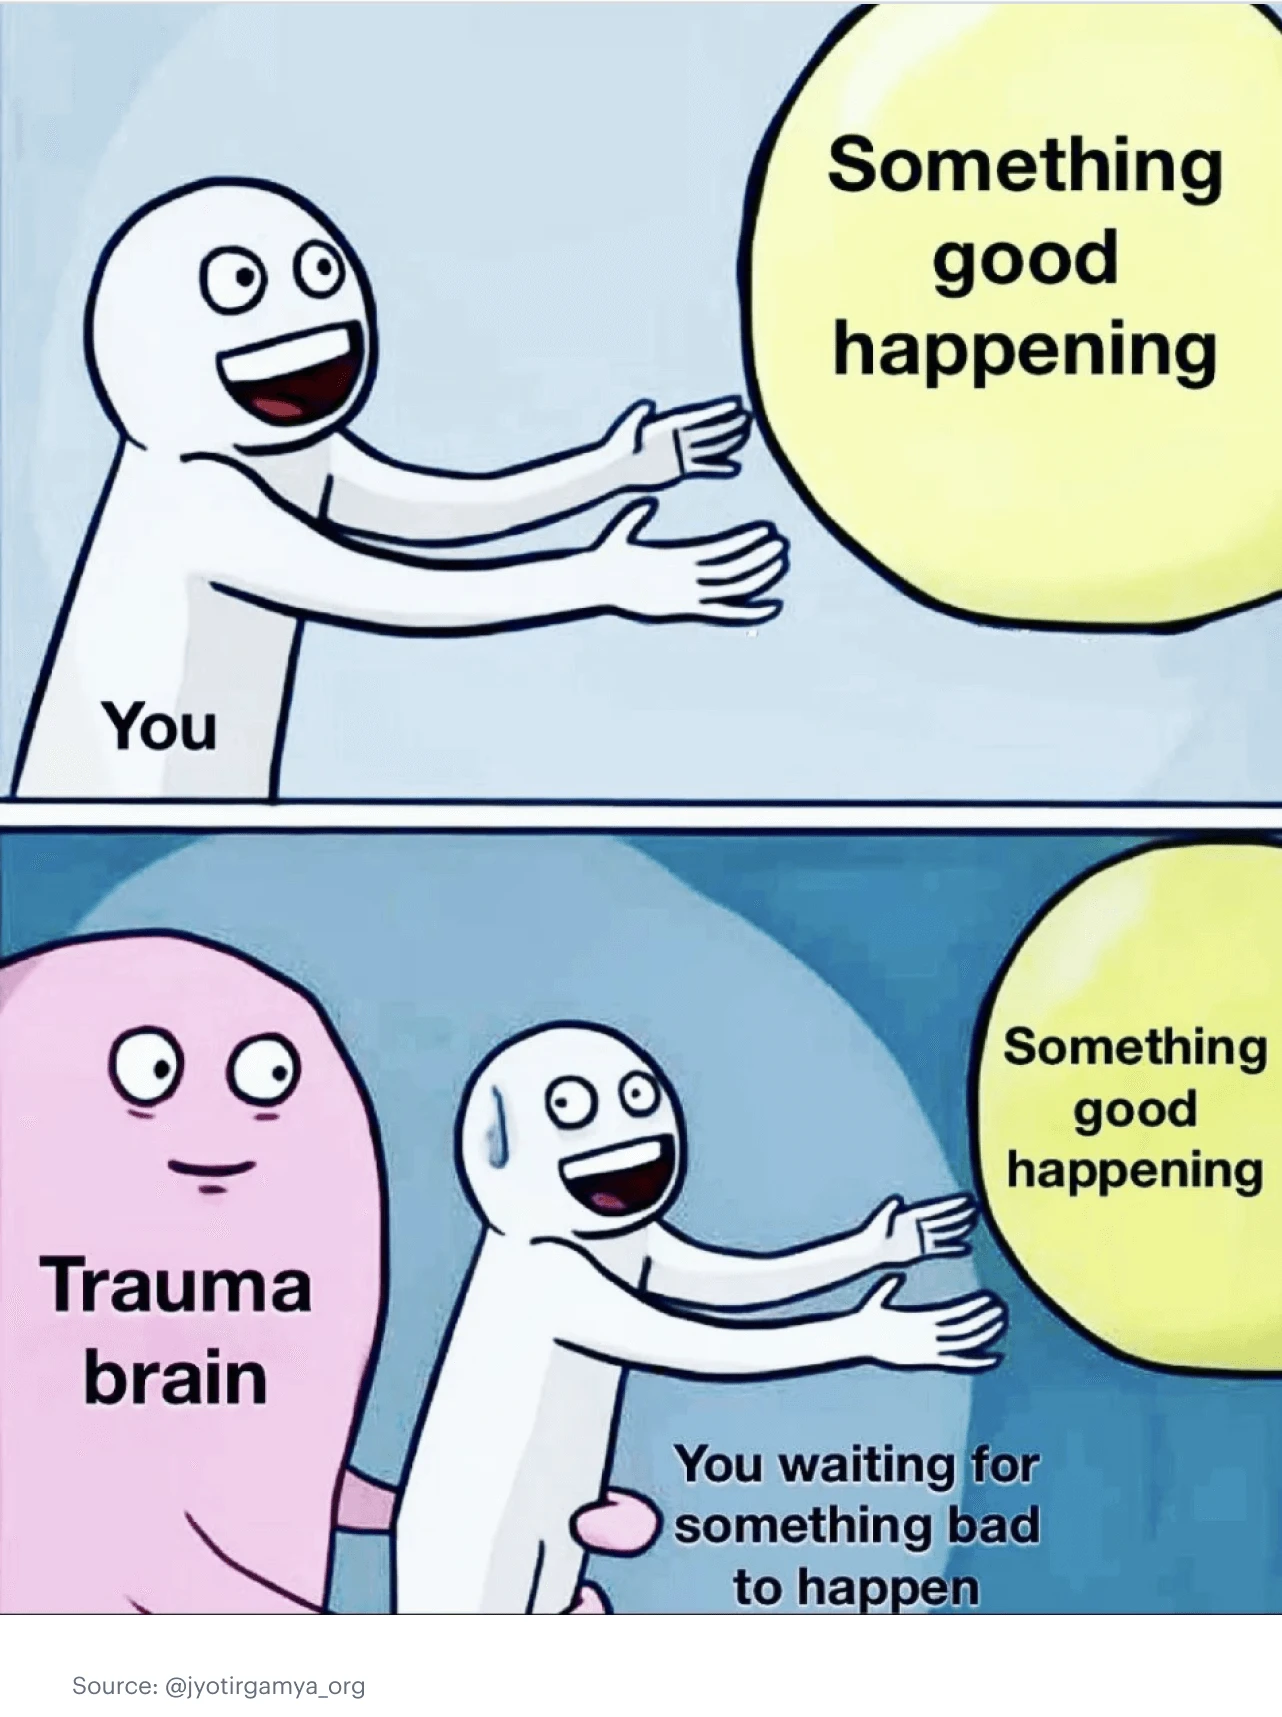 How your trauma brain impacts your reaction to something good happening.